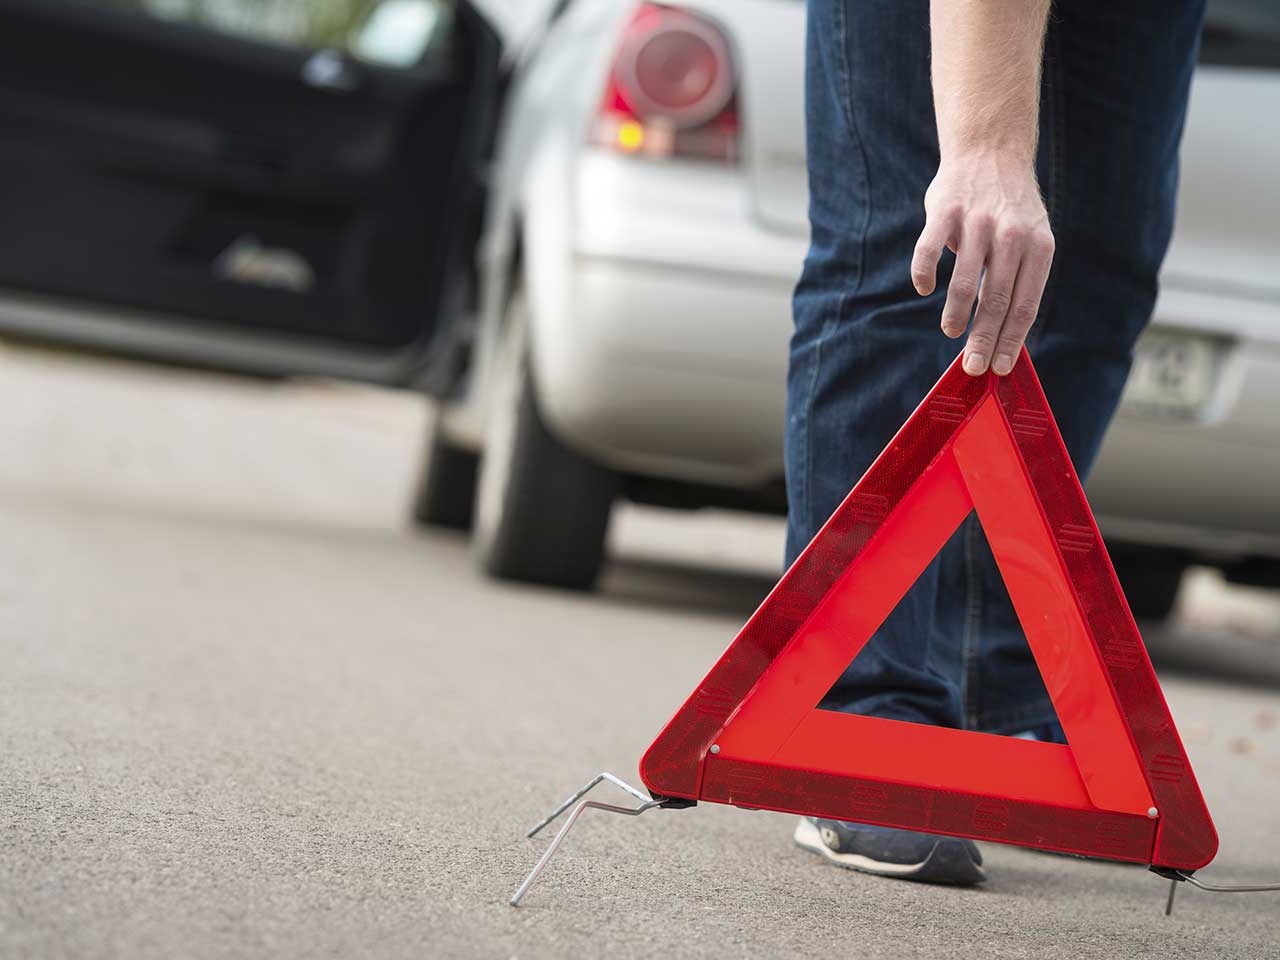 Scammer putting out a warning triangle to try to get motorists to pull over and help